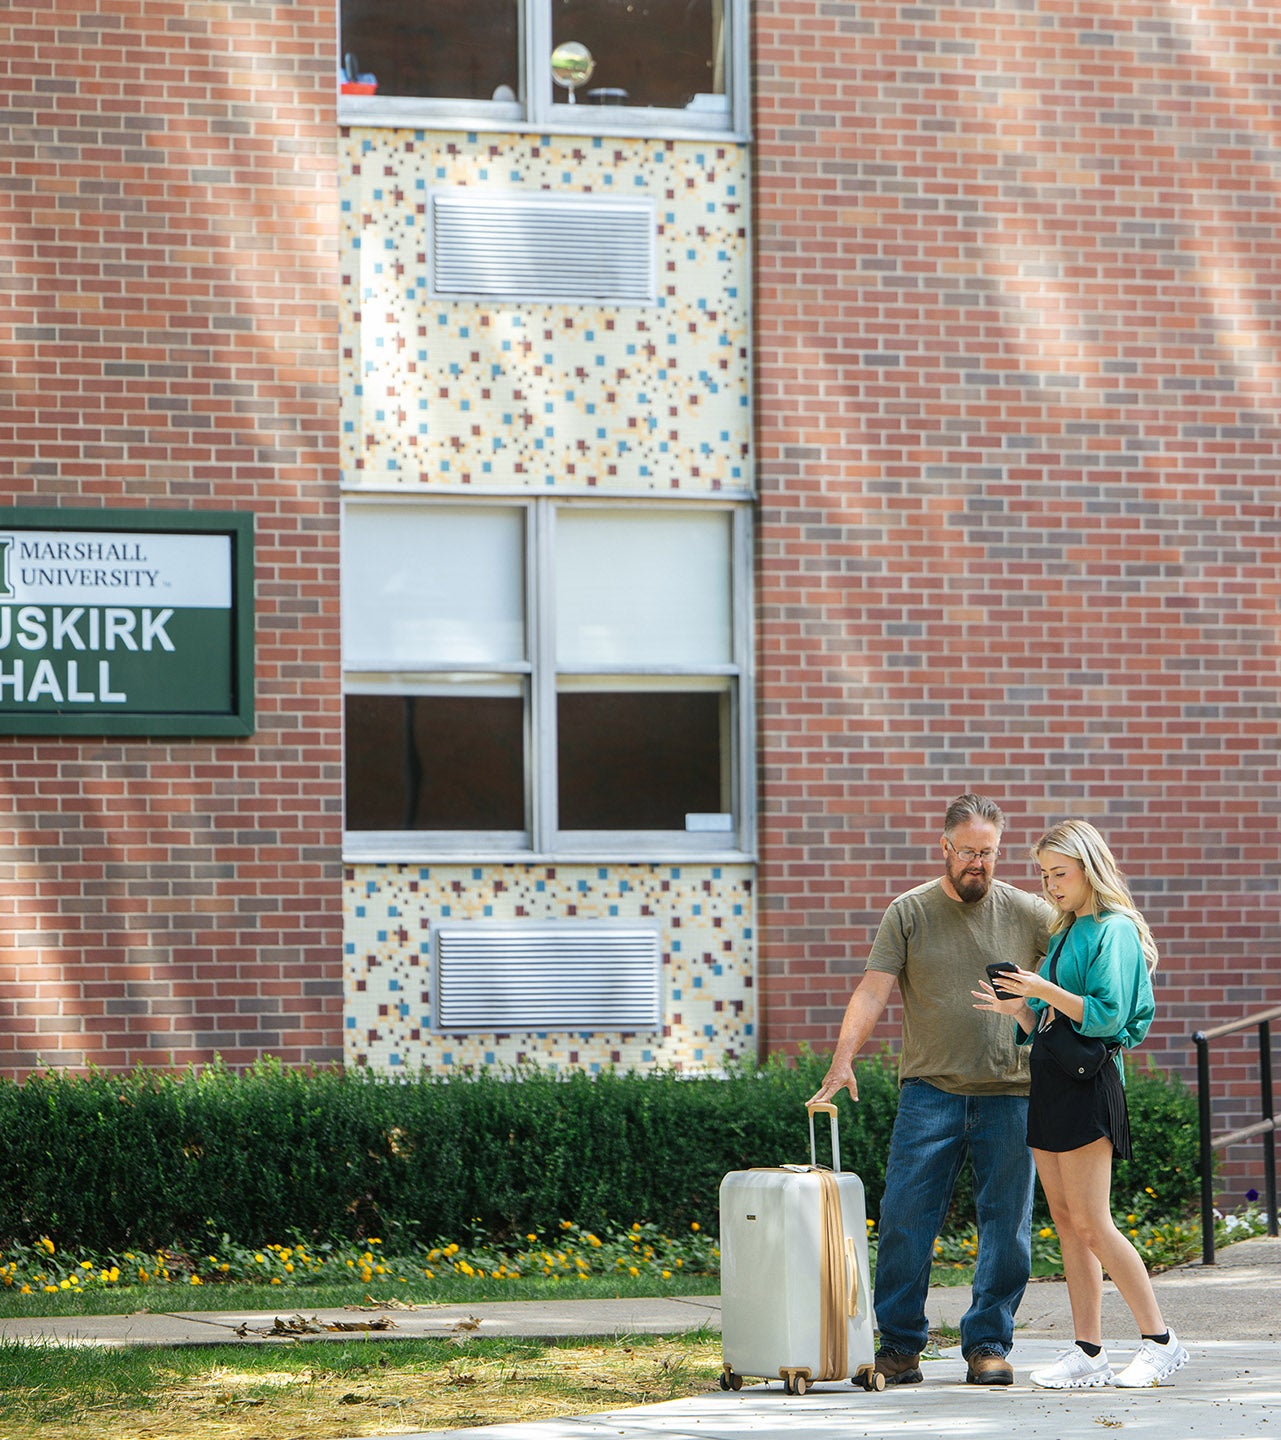 A father leans on a suitcase as his daughter shows him something on her phone during student move-in at Marshall University.